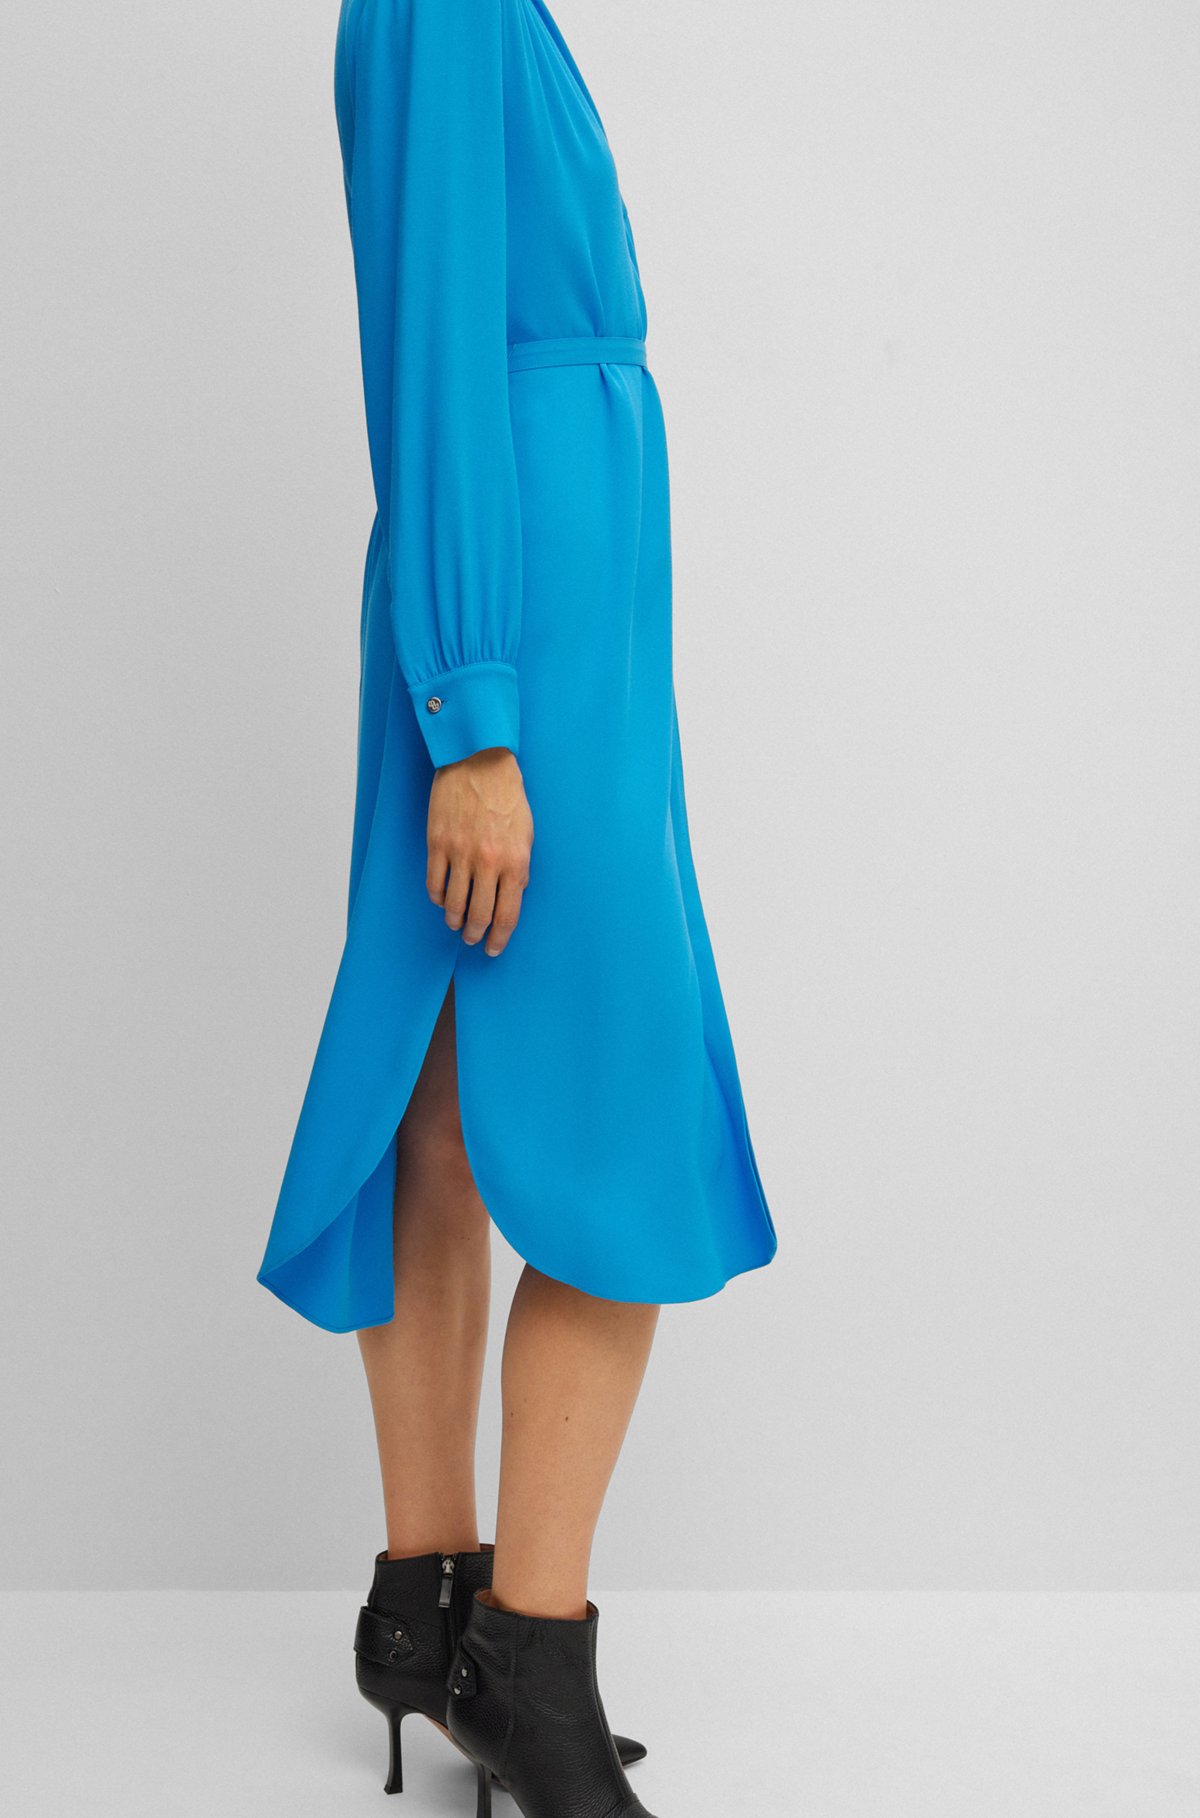 Belted dress with collarless V neckline and button cuffs, Turquoise